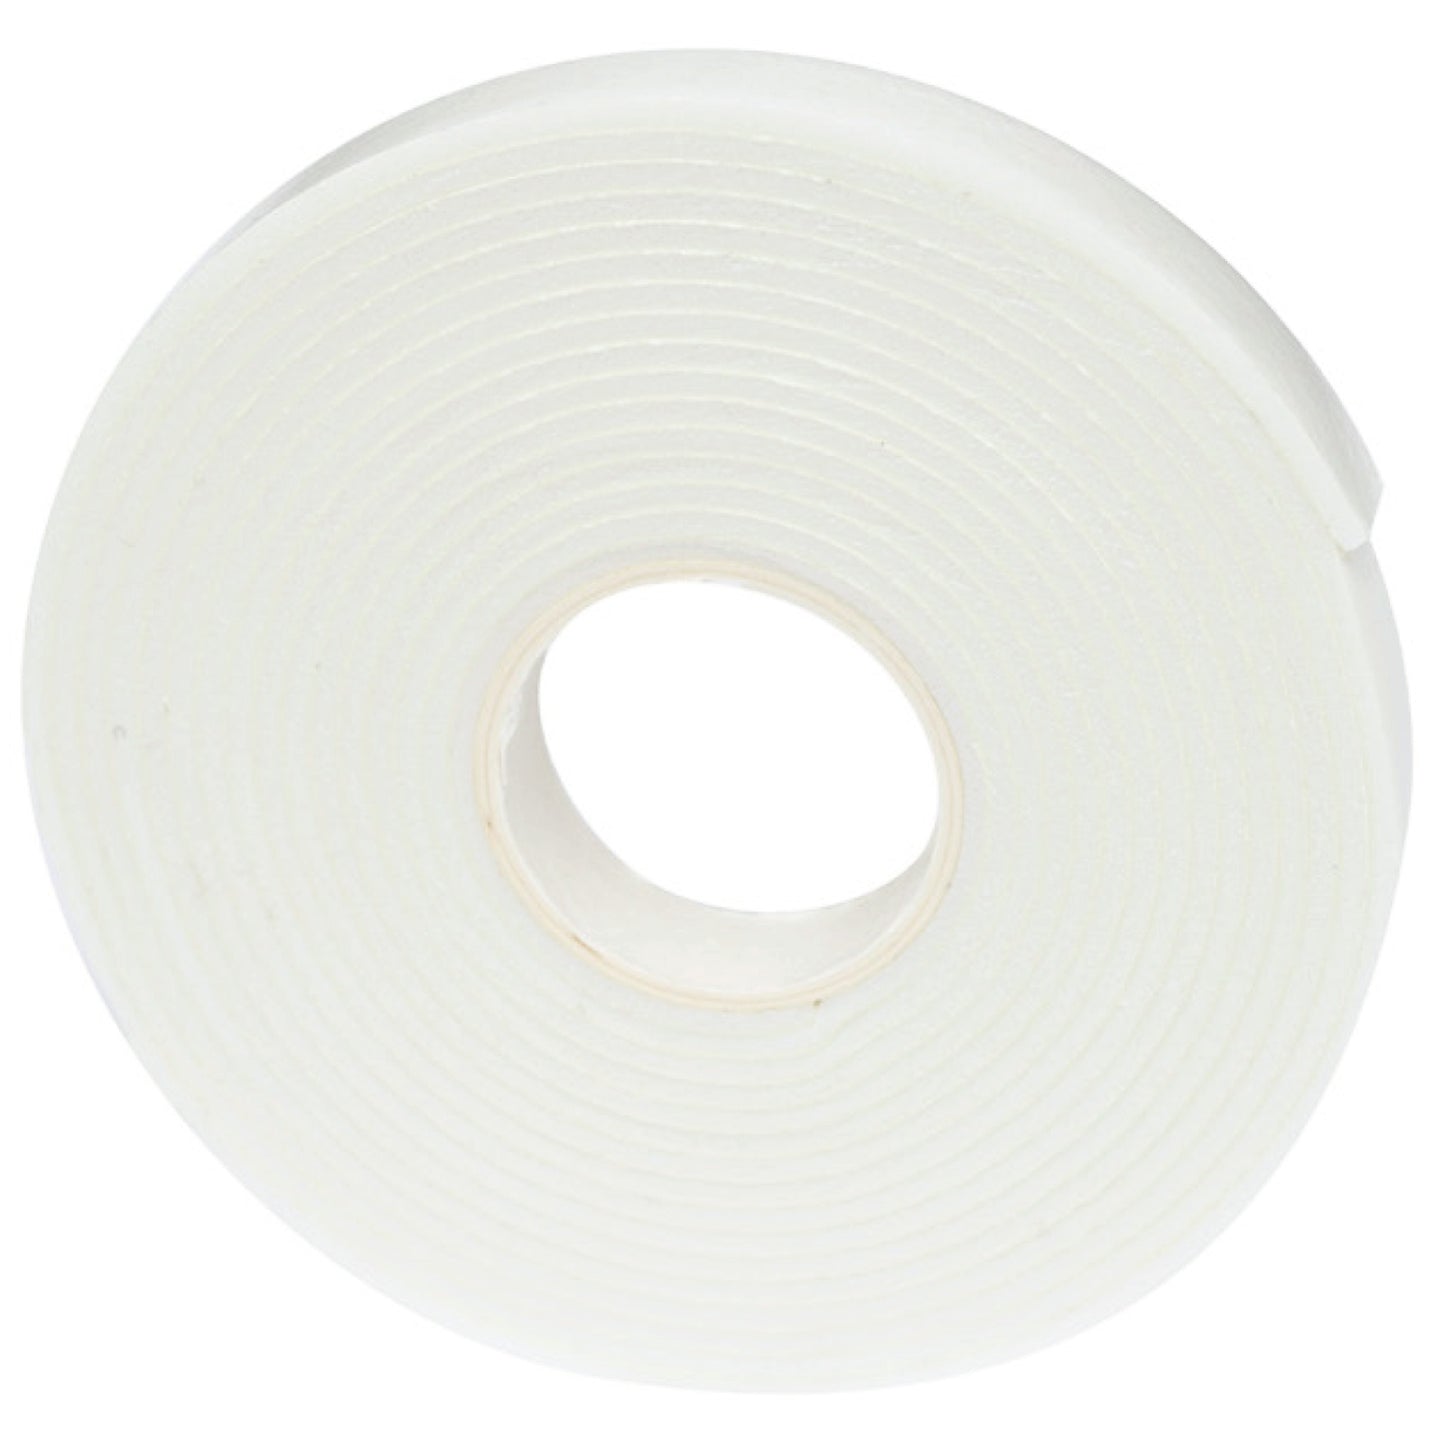 Sticky Thumb Double-Sided Foam Tape 3.94 Yards-White, 0.50"X1mm